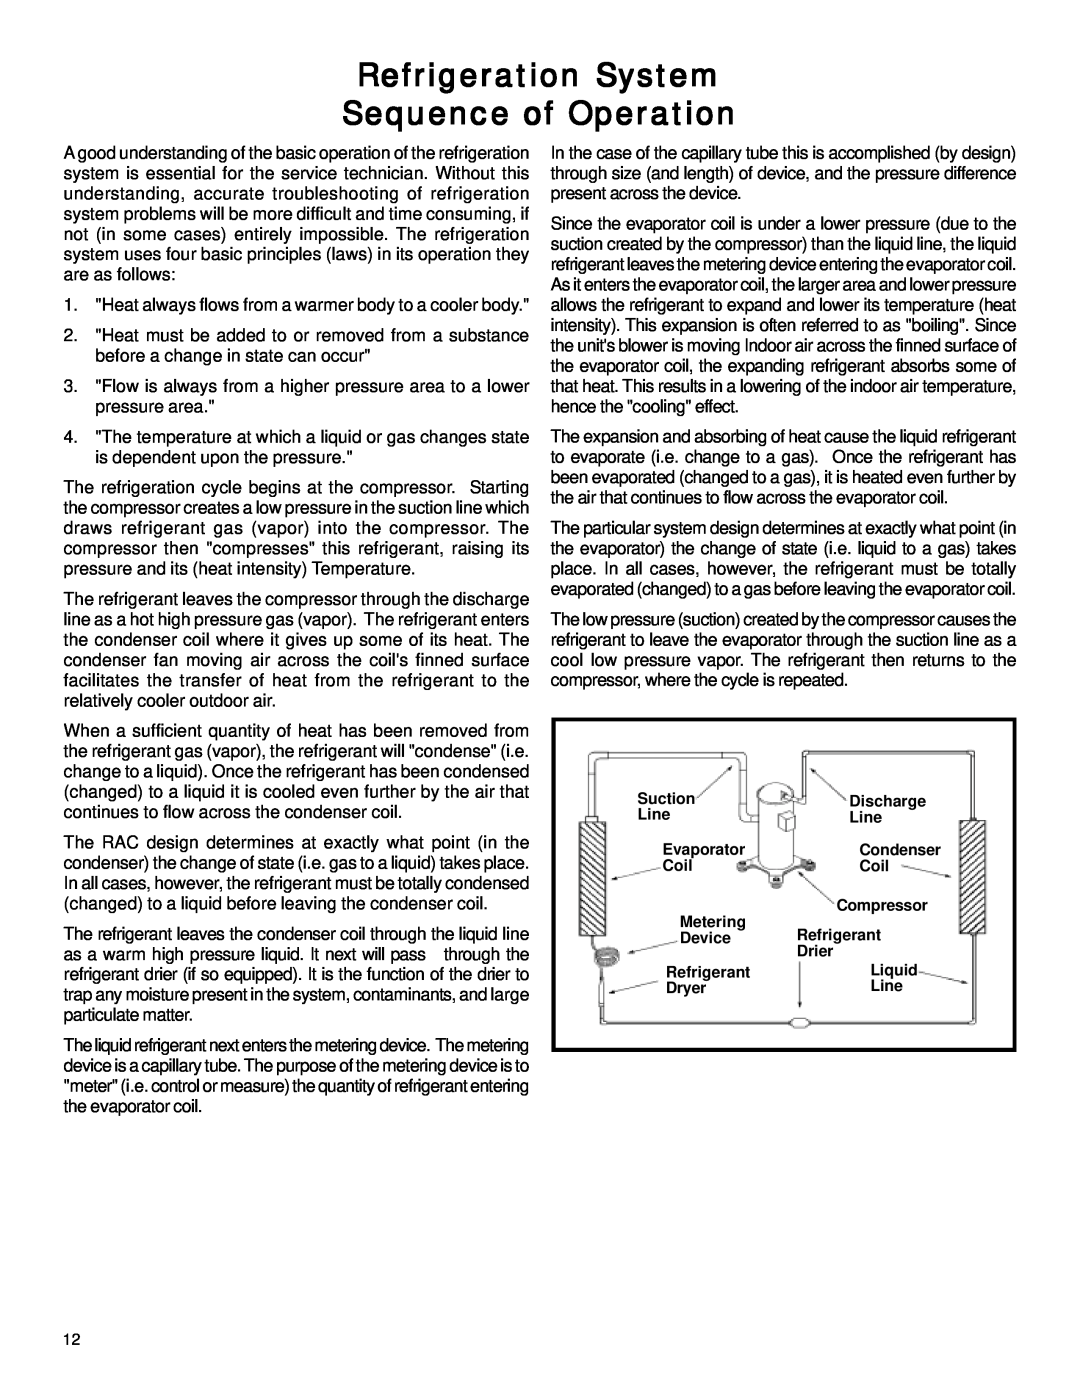 Friedrich 2003 service manual Refrigeration System Sequence of Operation 